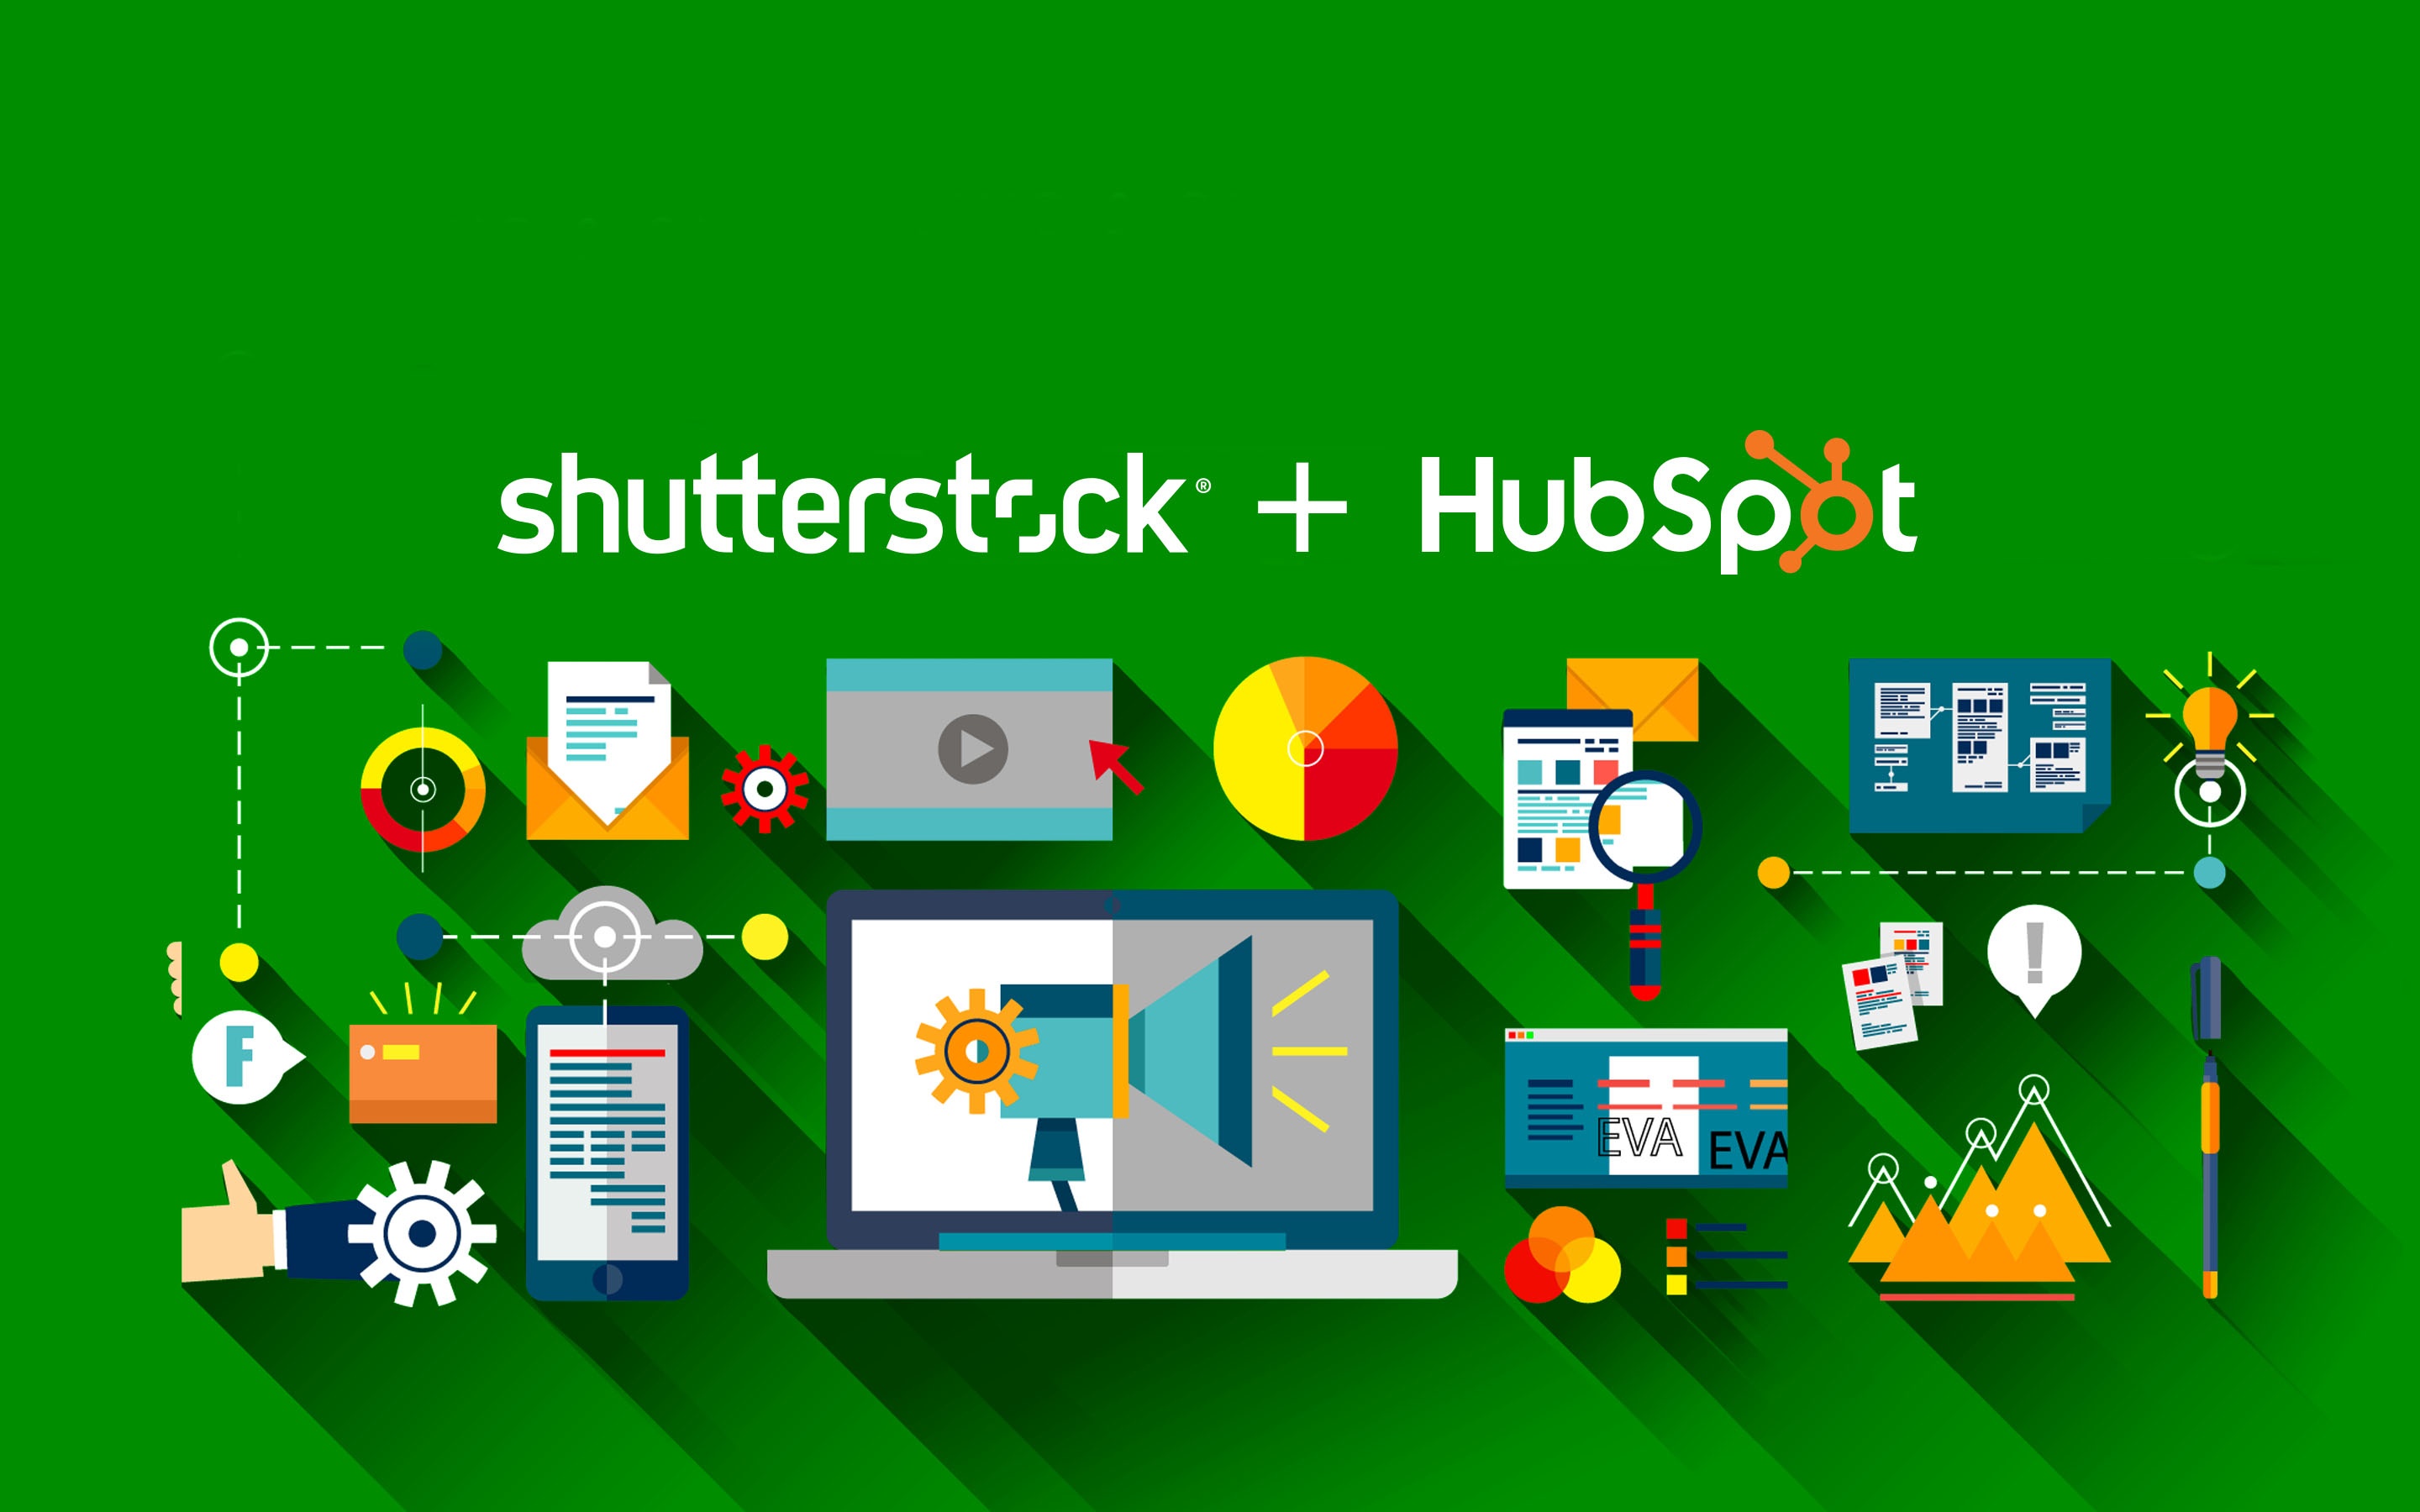 Shutterstock and HubSpot Partner to Bring Digital Marketers Easy Access to Images